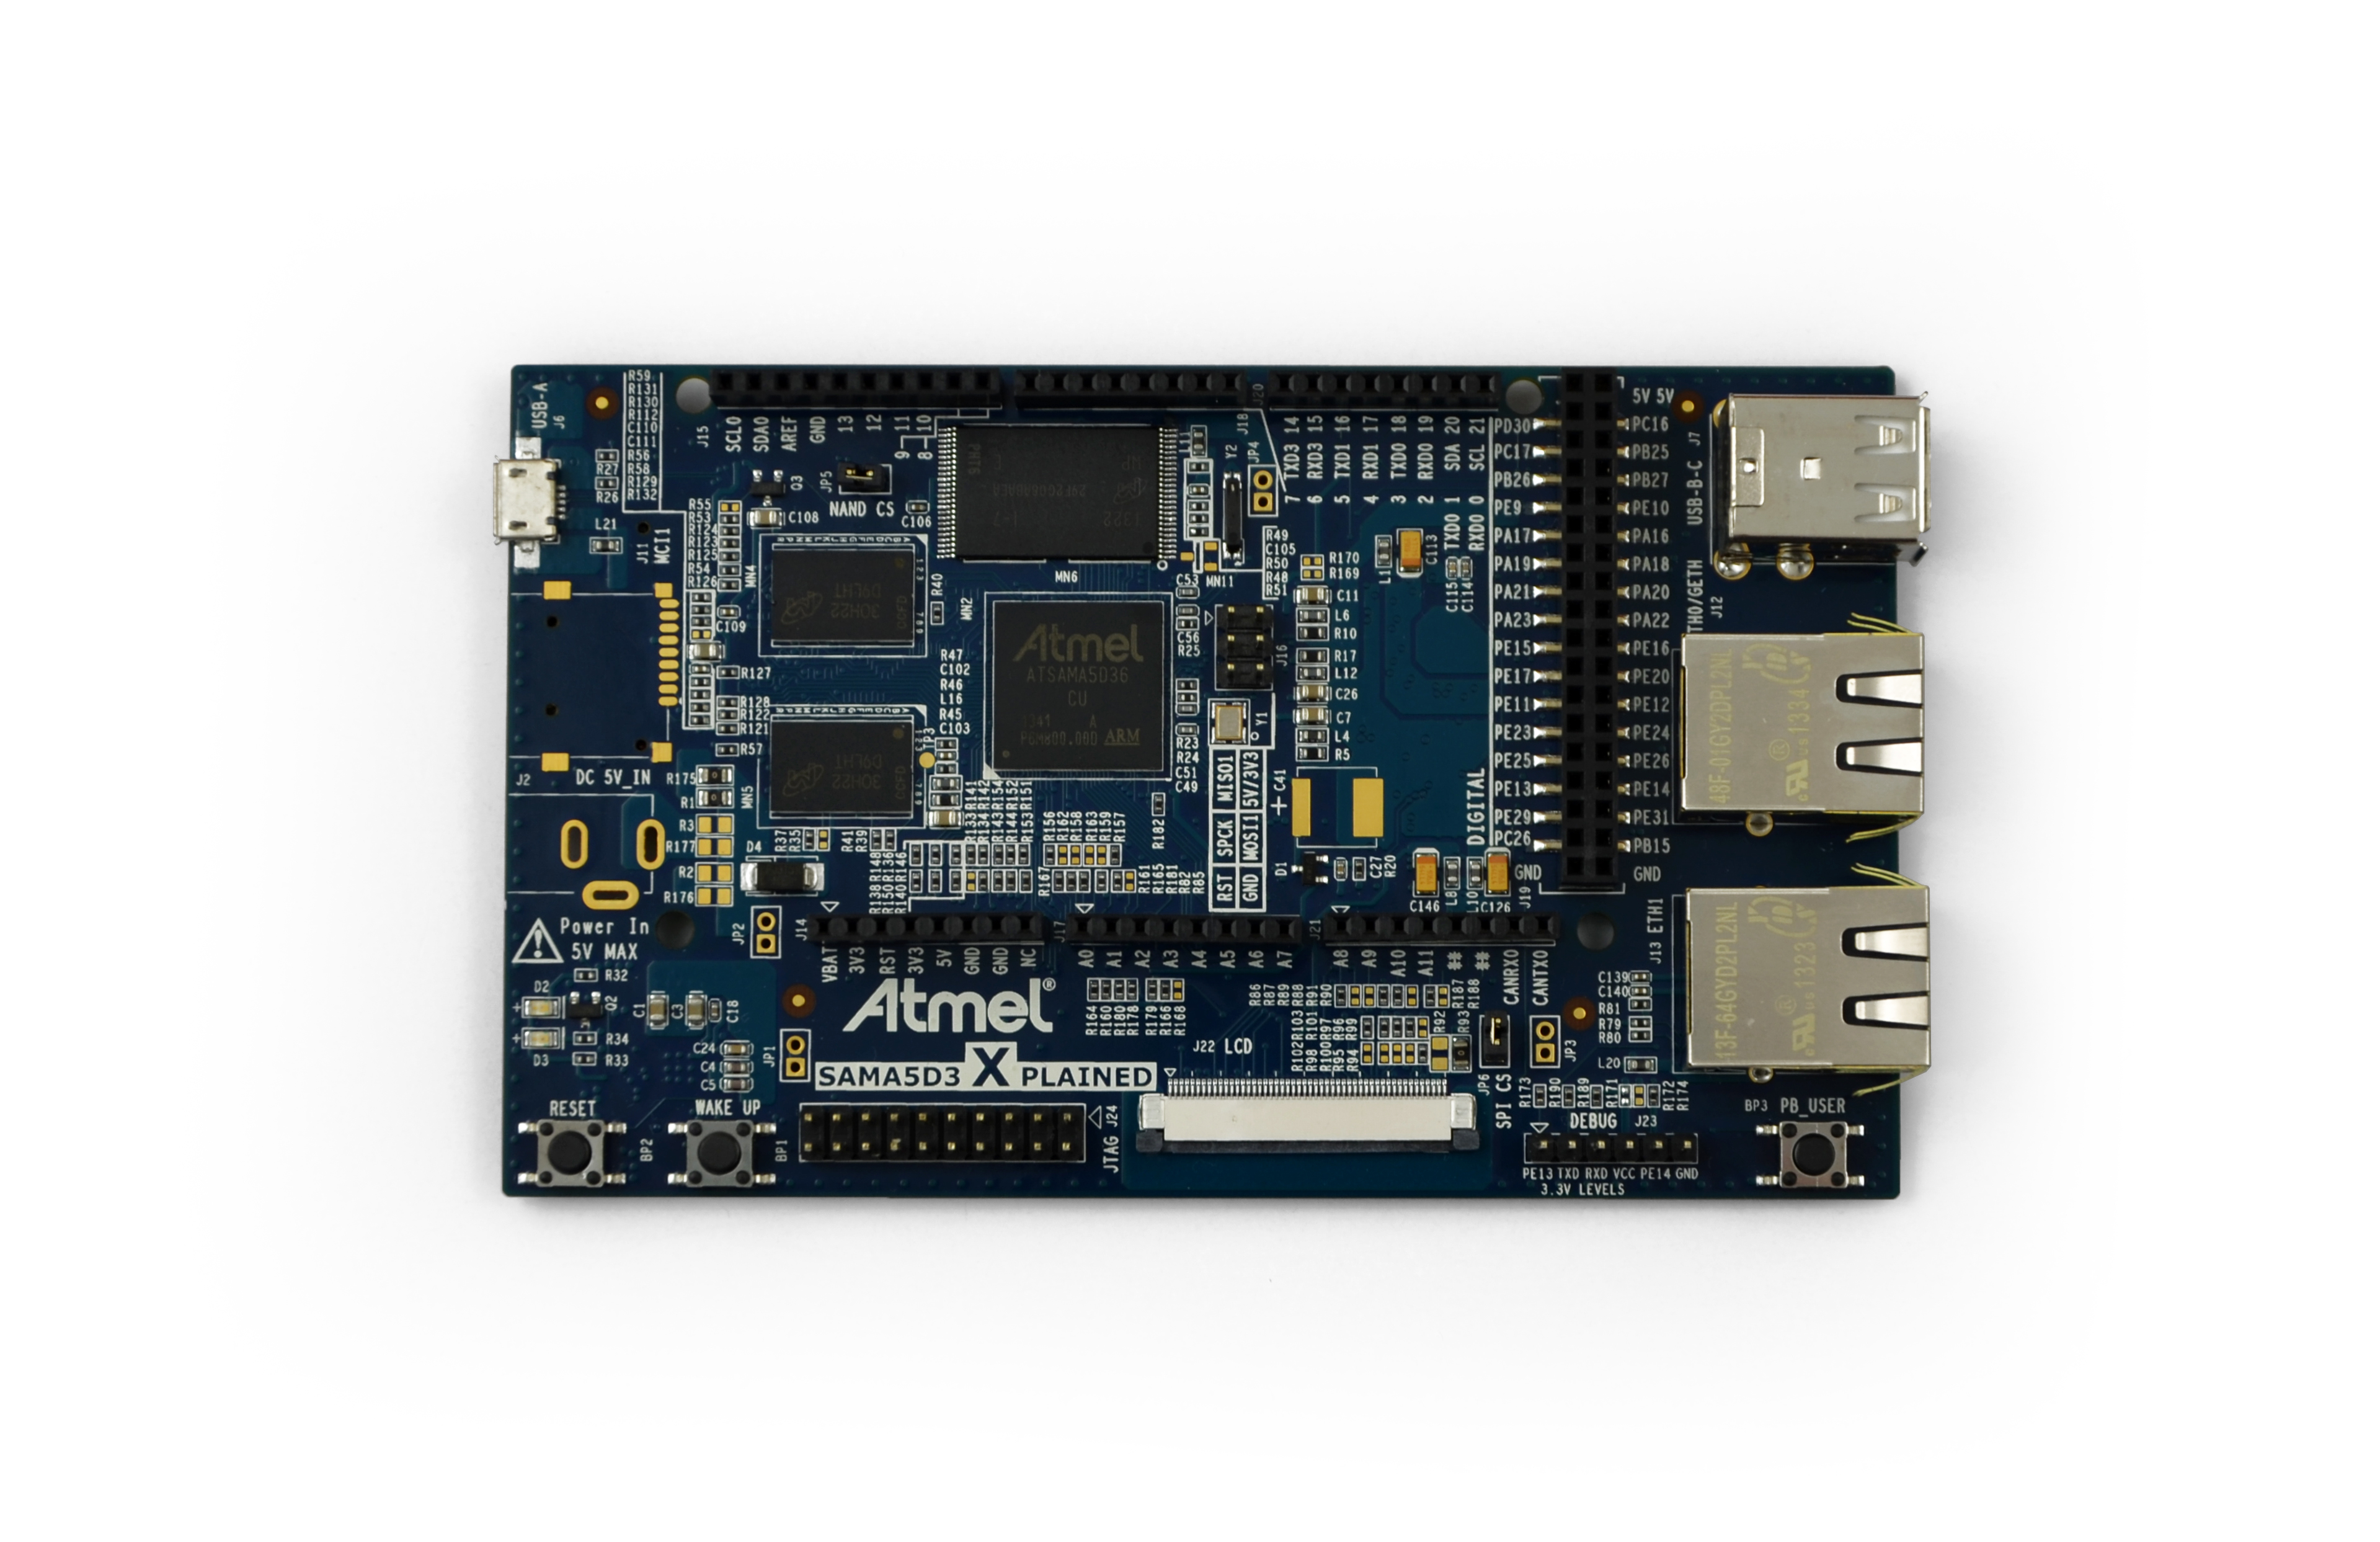 Atmel Xplained - Fast prototyping and evaluation platform based on the SAMA5D3 ARM Cortex-A5. Powerful Atmel’s SAMA5D36 Cortex-A5 MPU, 2GBit DDR2 RAM, 2Gbit Flash, Dual Ethernet (GMAC + EMAC), Arduino R3-compatible header and LCD connector.